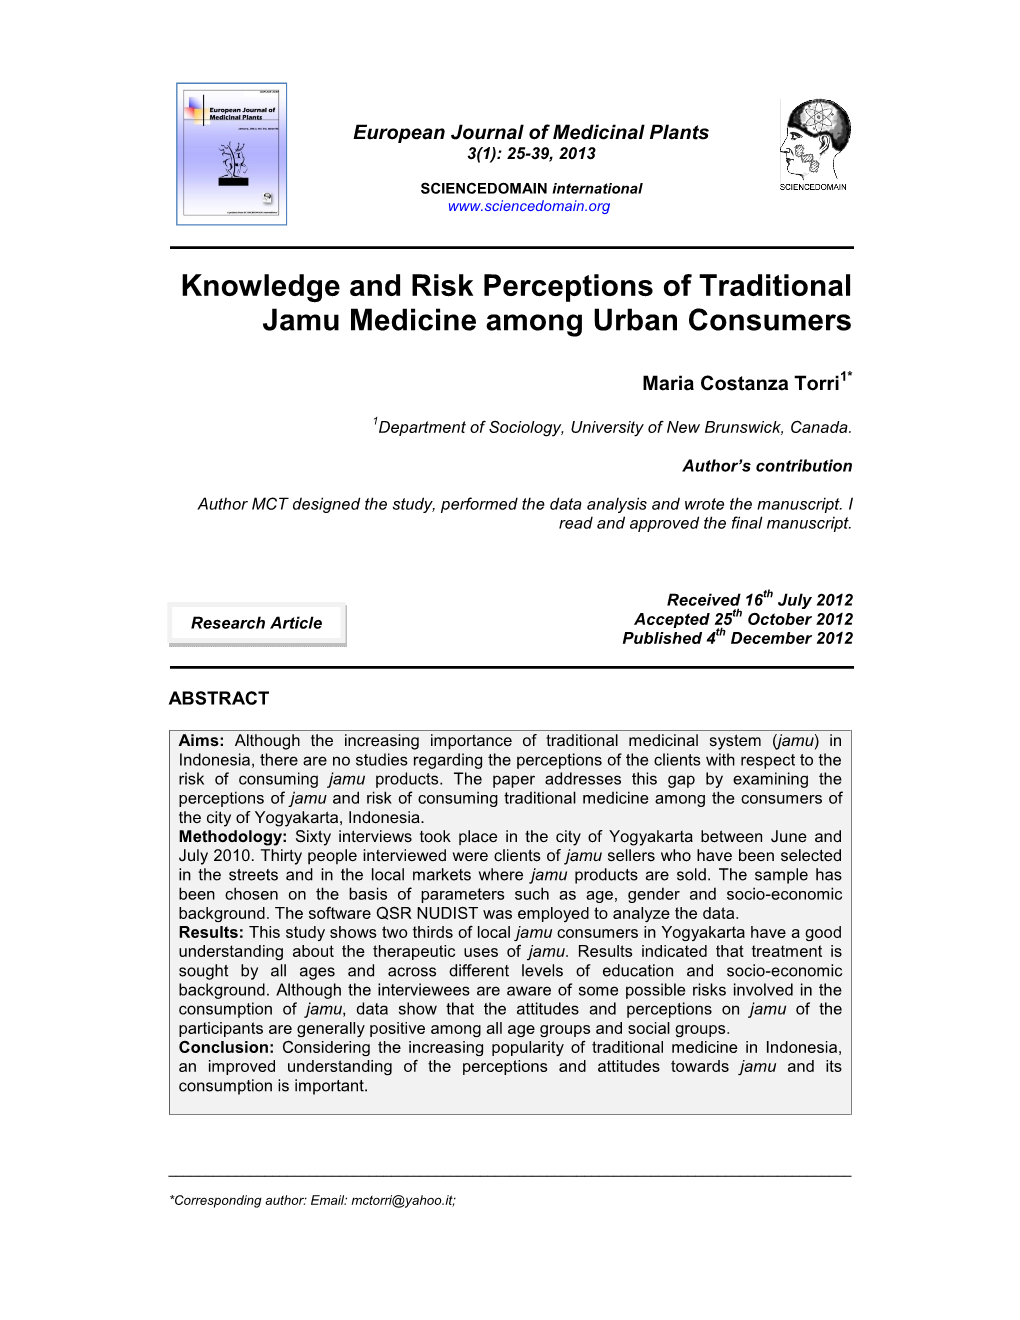 Knowledge and Risk Perceptions of Traditional Jamu Medicine Among Urban Consumers